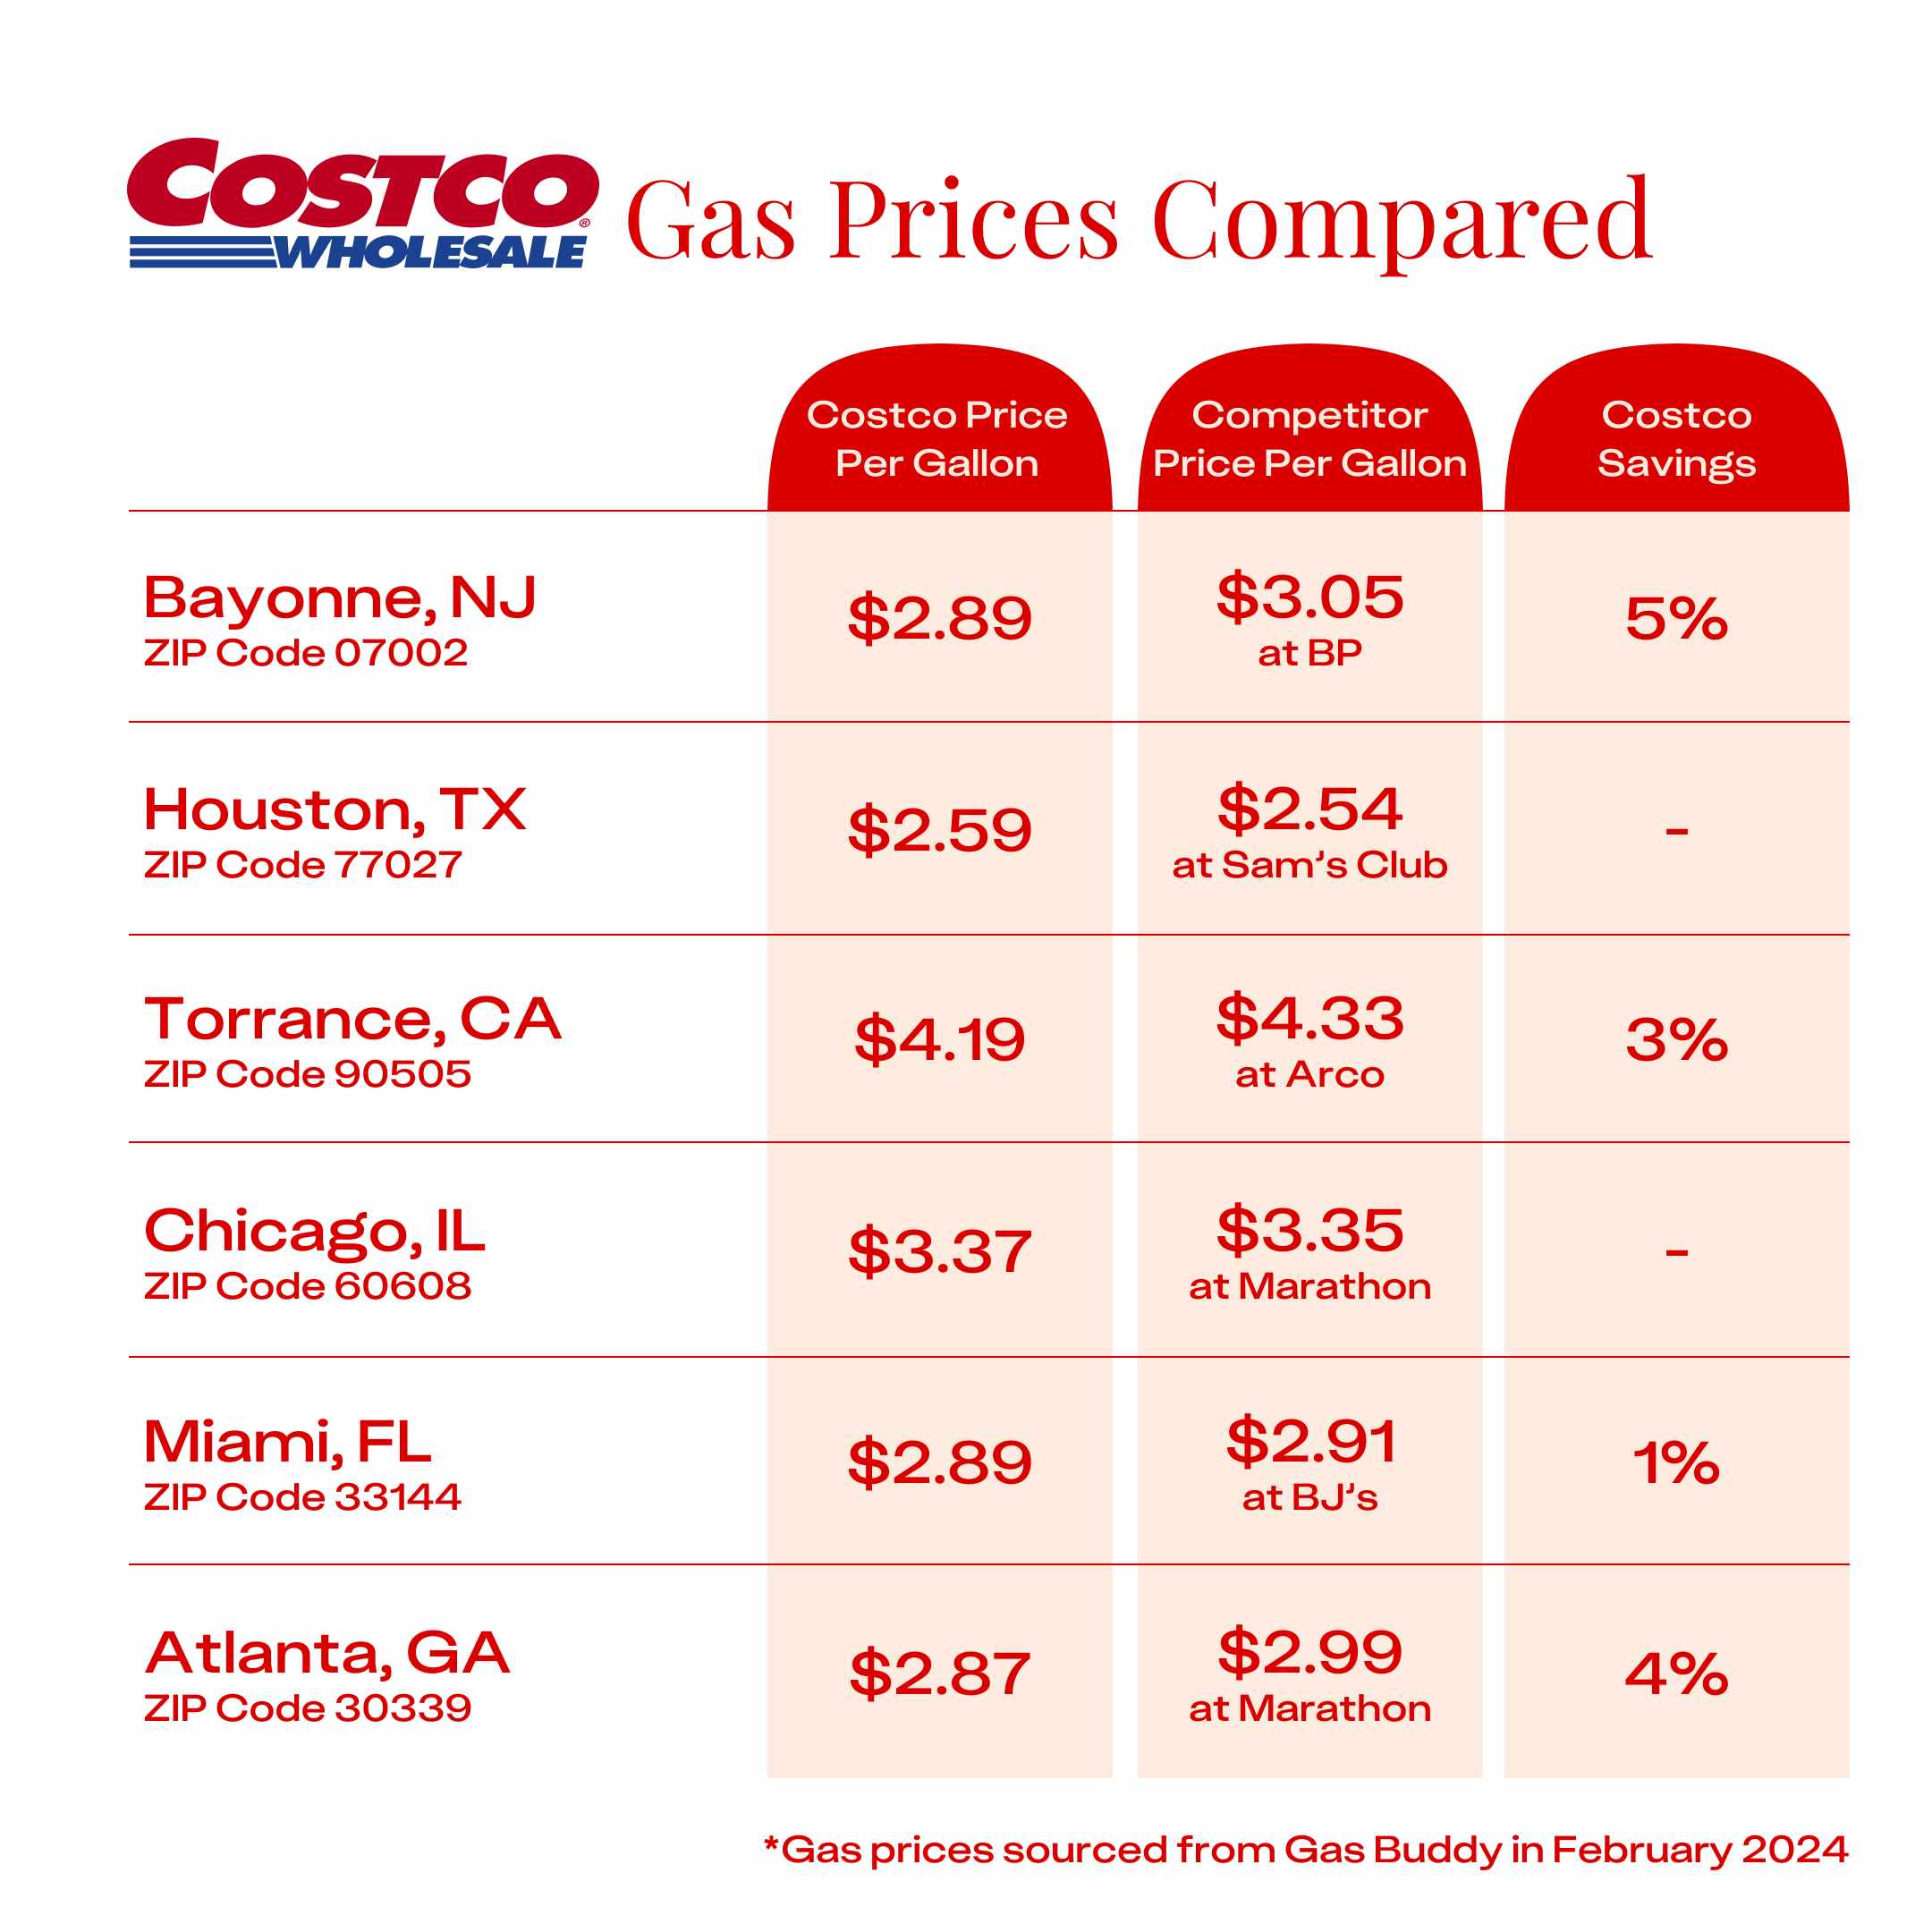 The price of gas at Costco compared to the next cheapest competitor in six cities, showing that average Costco gas savings are 1% - 5%.